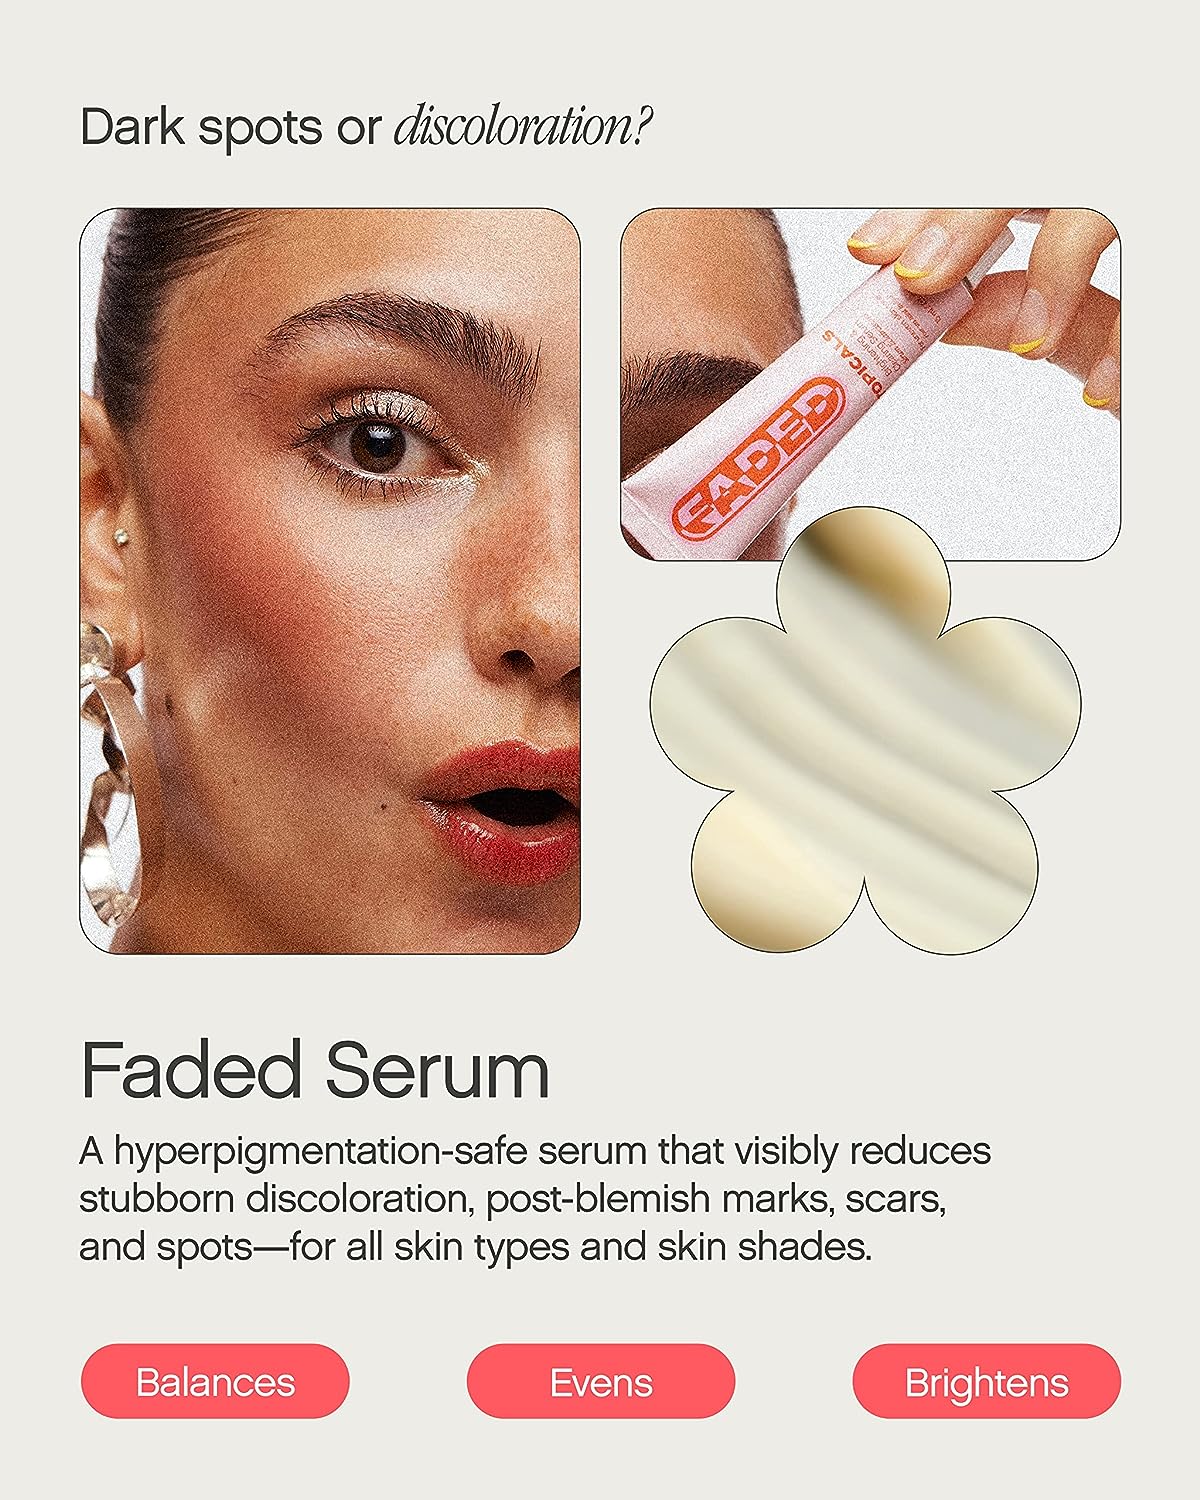 TOPICALS FADED SERUM FOR DARK SPOTS & DISCOLORATION